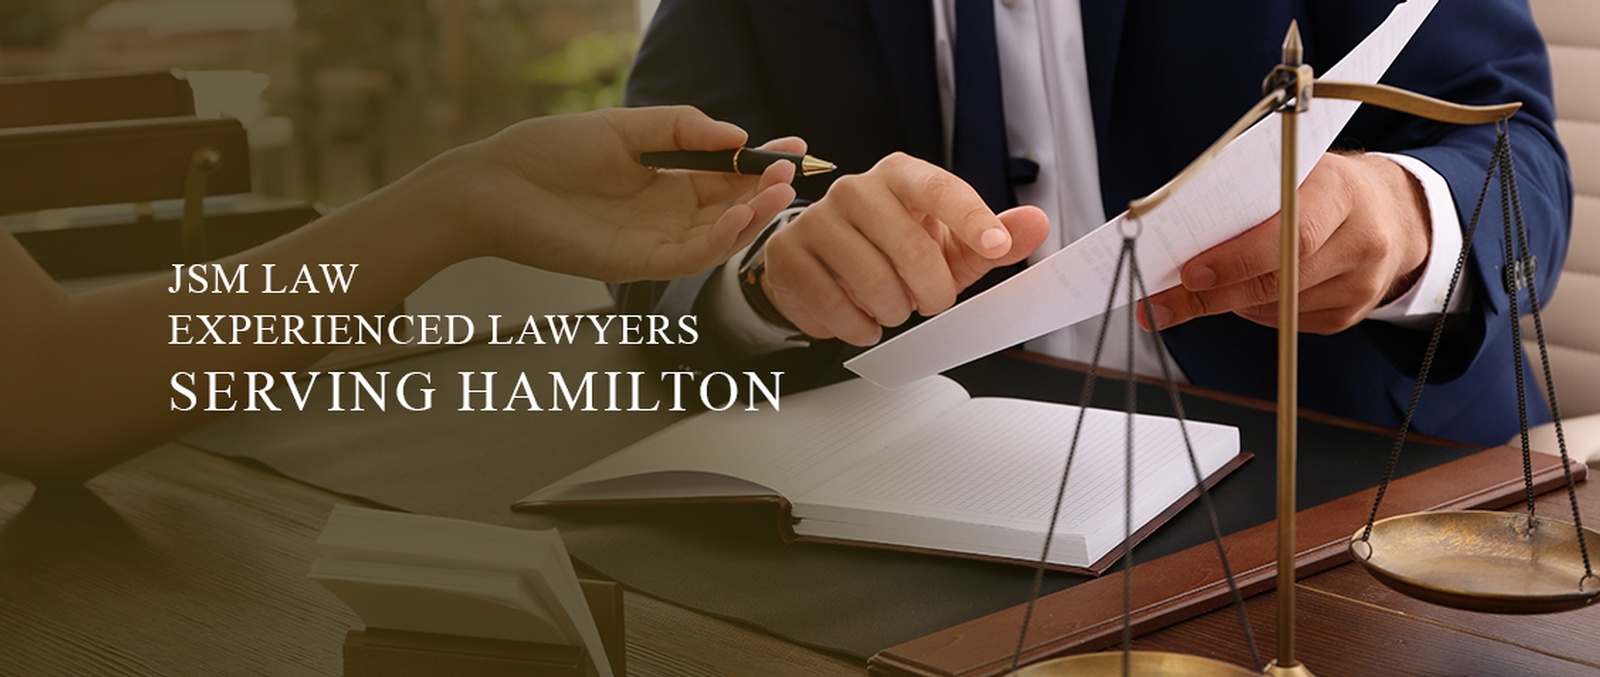 CORPORATE, CRIMINAL AND PERSONAL INJURY LAWYERS HAMILTON ON